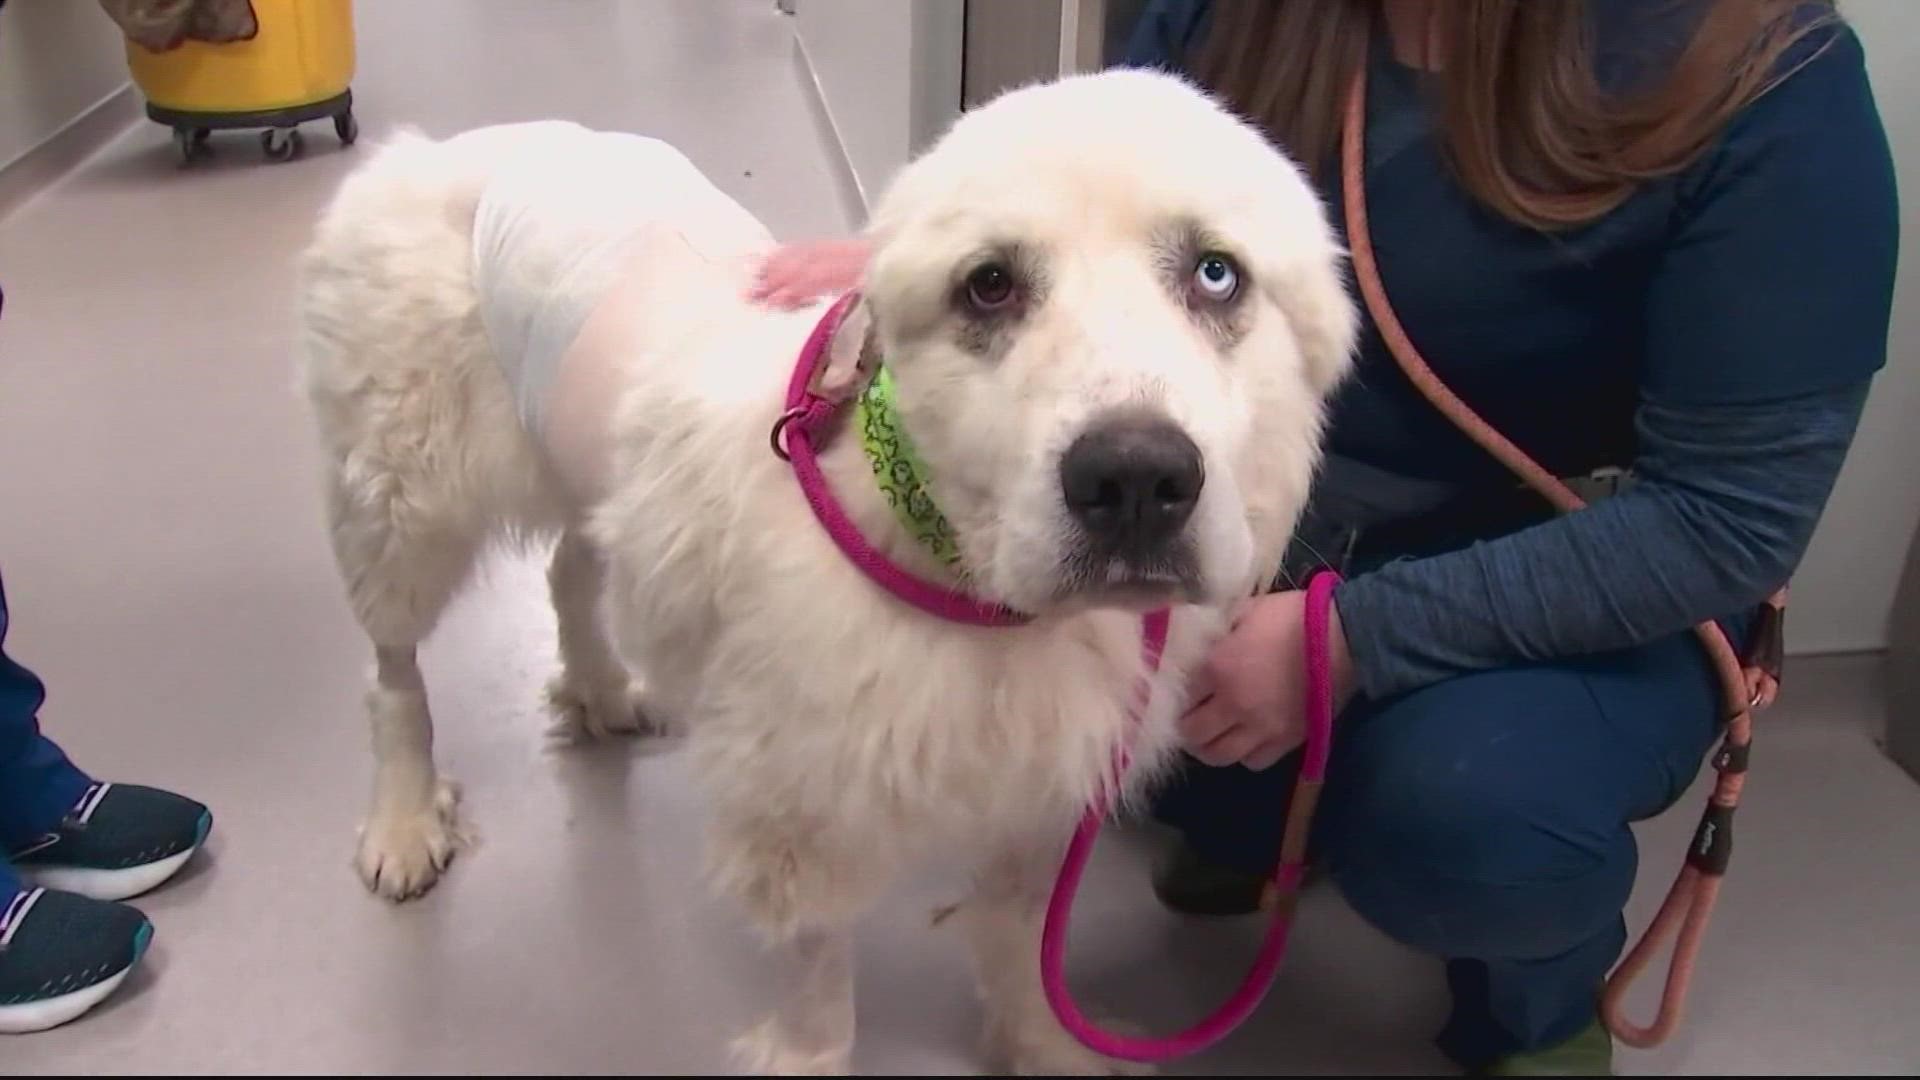 A Georgia sheepdog named Casper is recovering after killing a pack of coyotes that attacked his owner's flock of sheep.